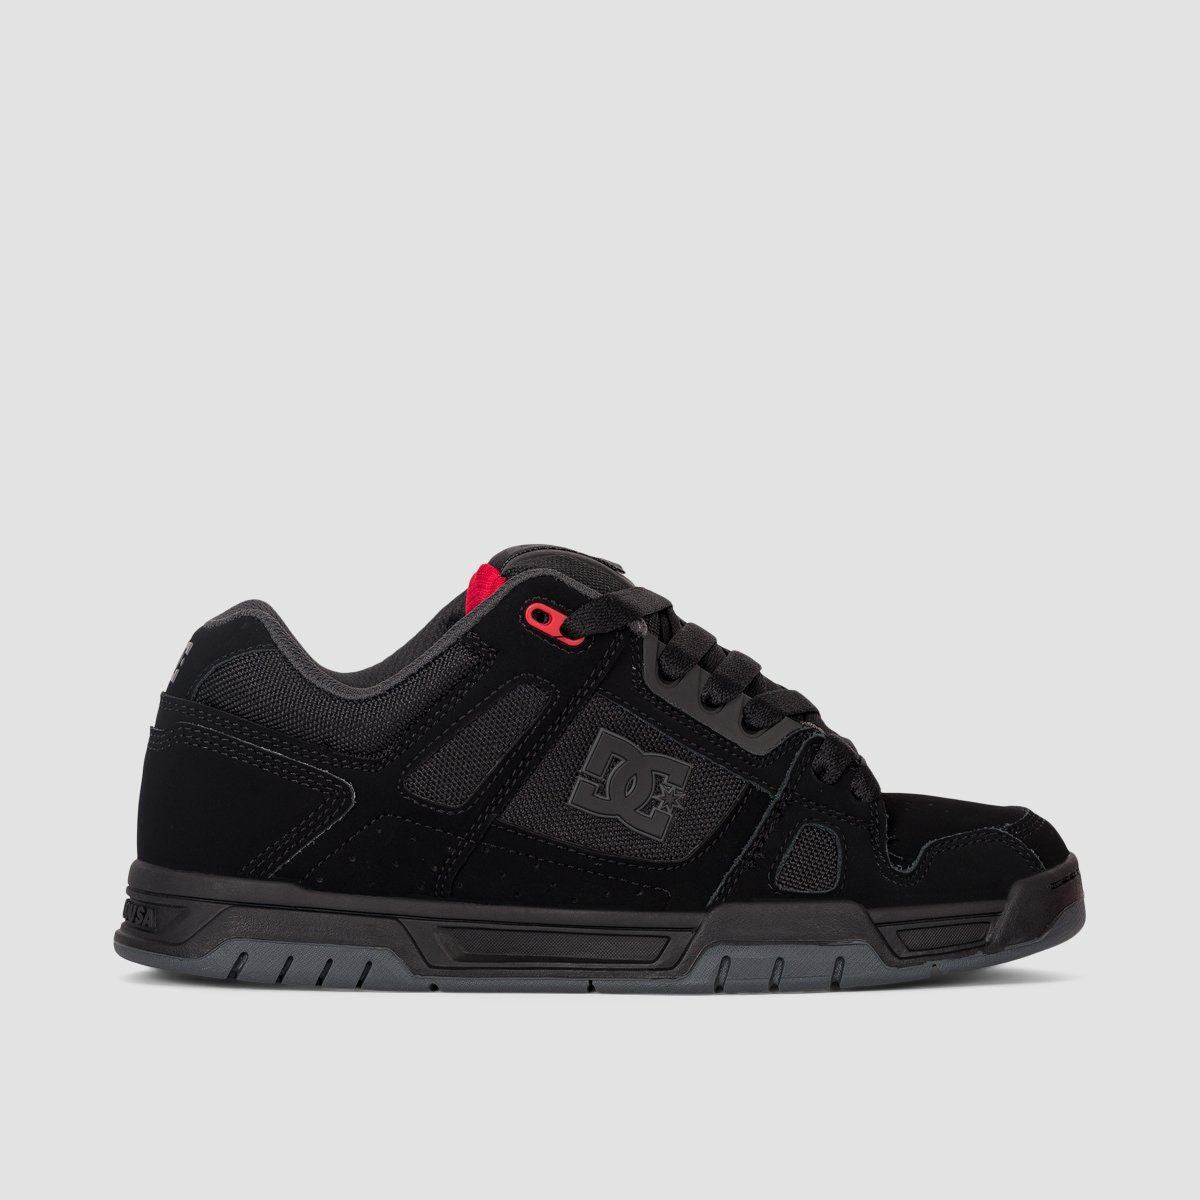 DC Stag Shoes - Black/Grey/Red